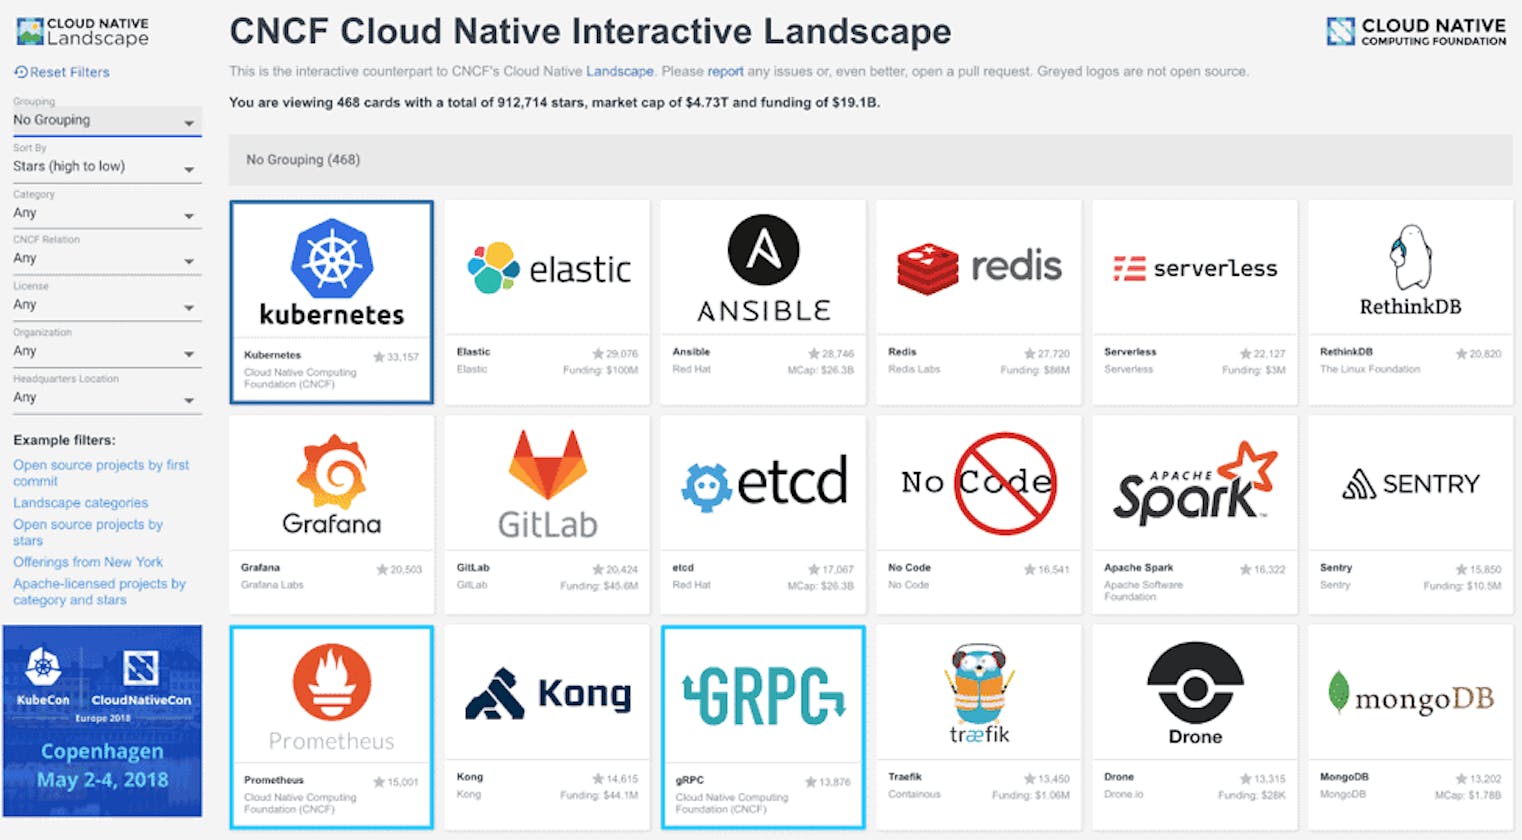 Demystifying the CNCF Landscape: Navigating the Cloud-Native Ecosystem